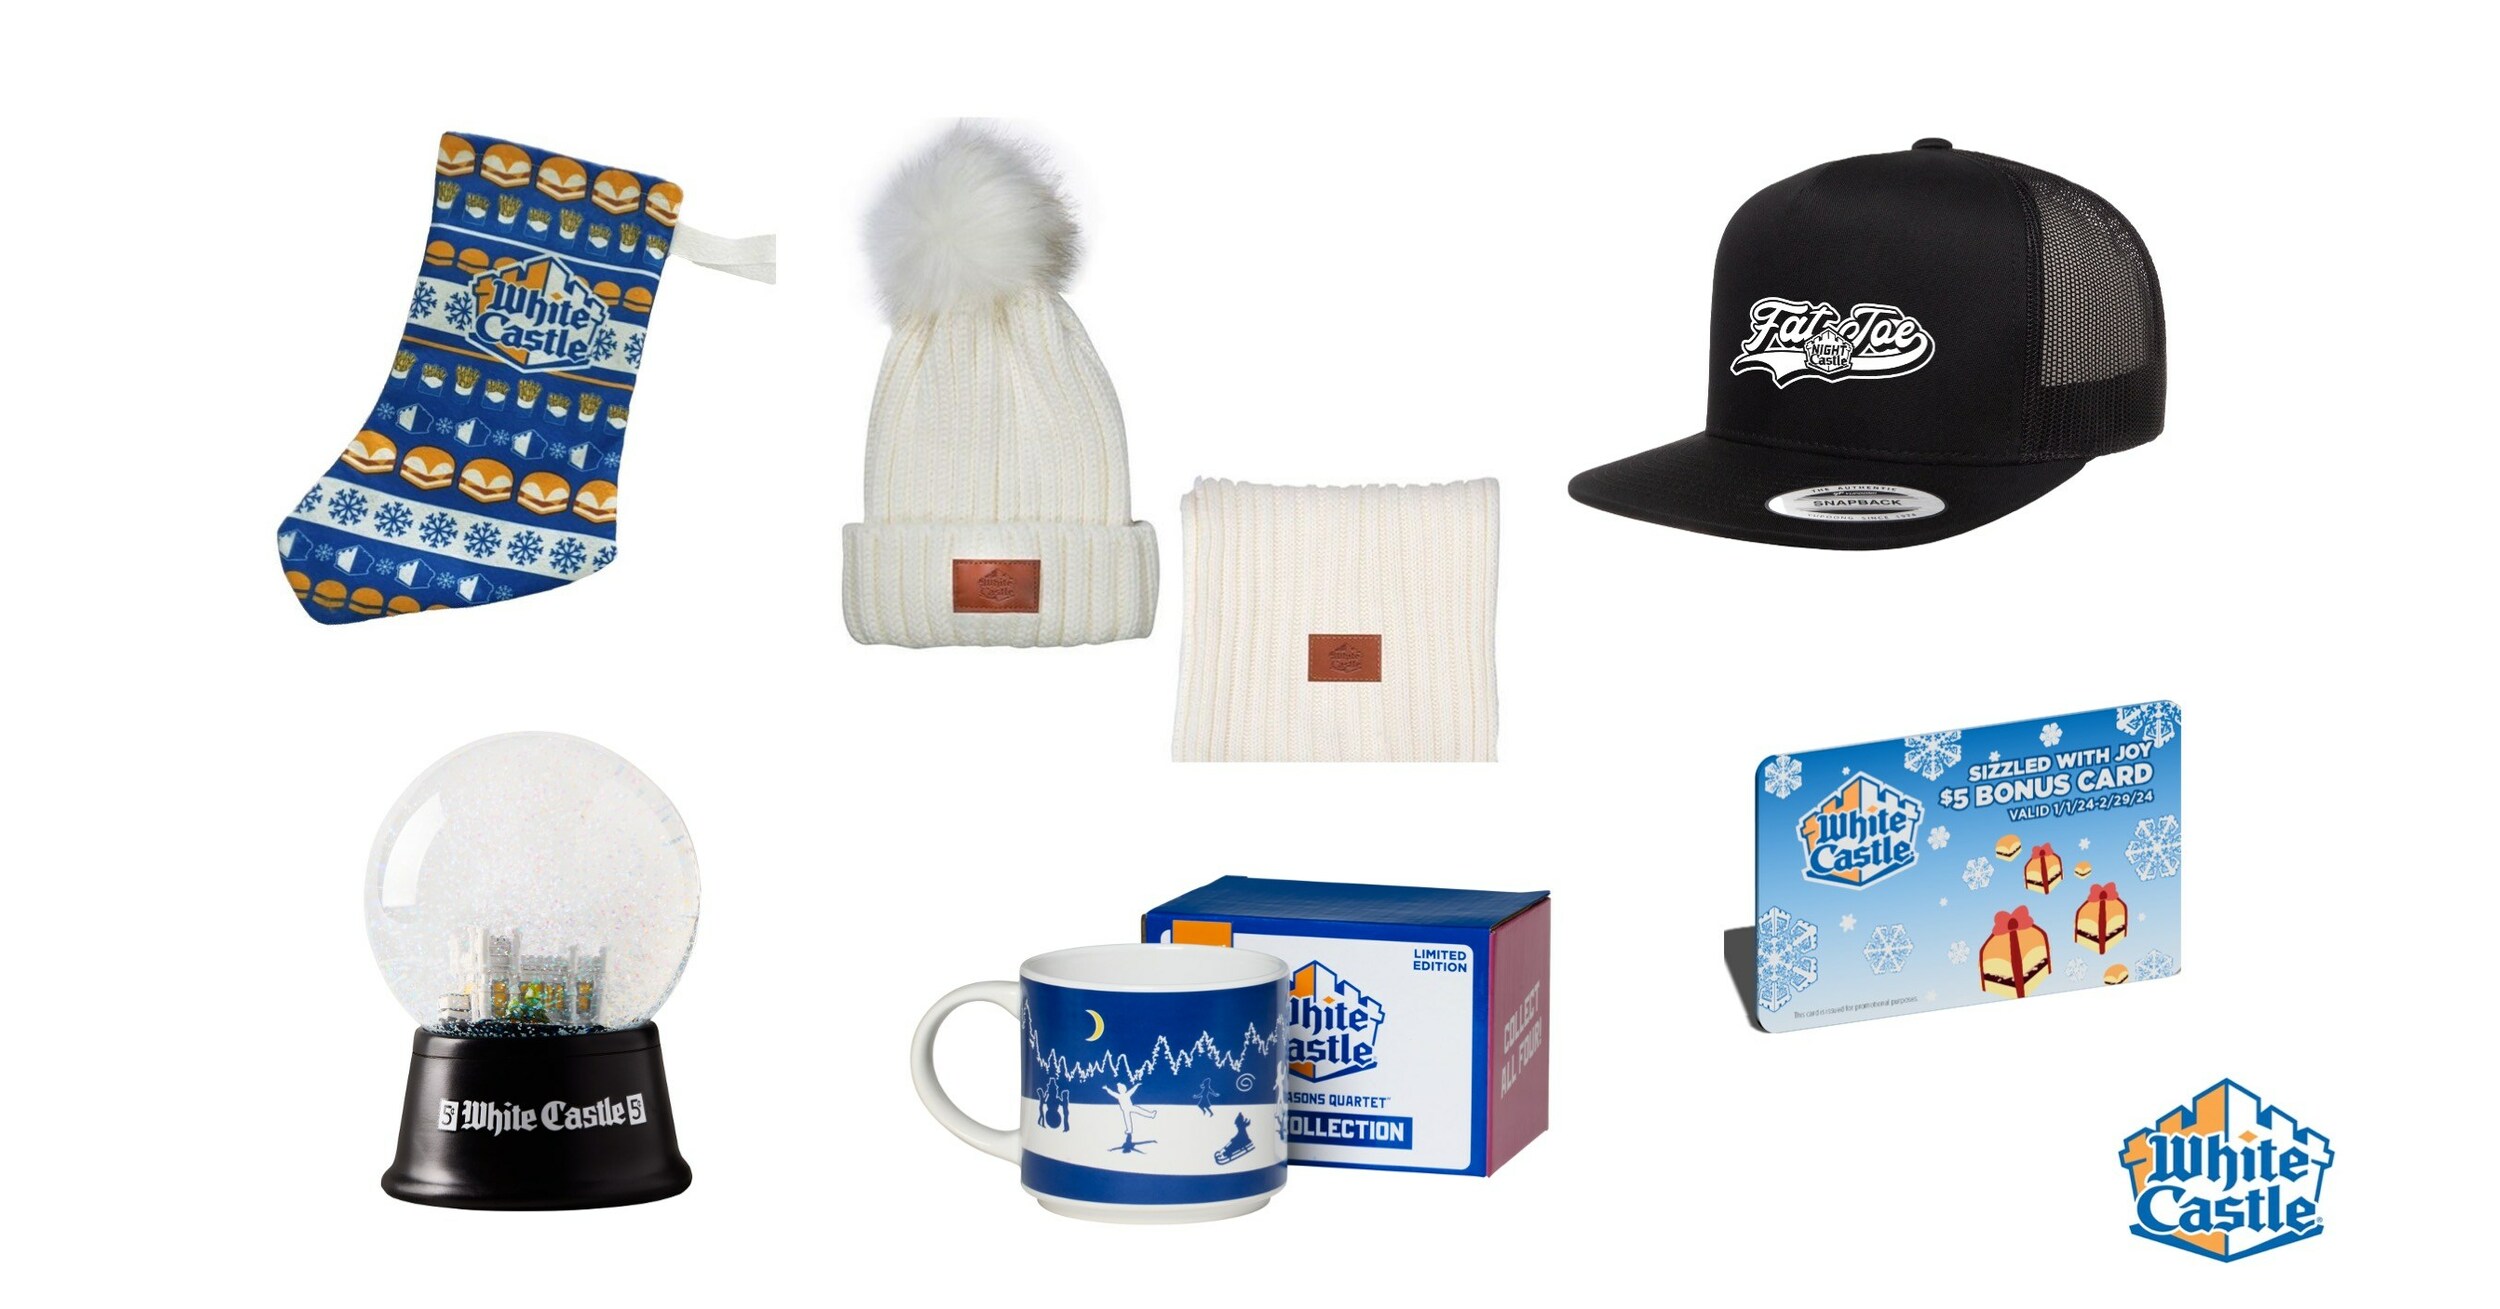 Gifts for Teen Boys - Christmas Gift Guide - Frosted Blog